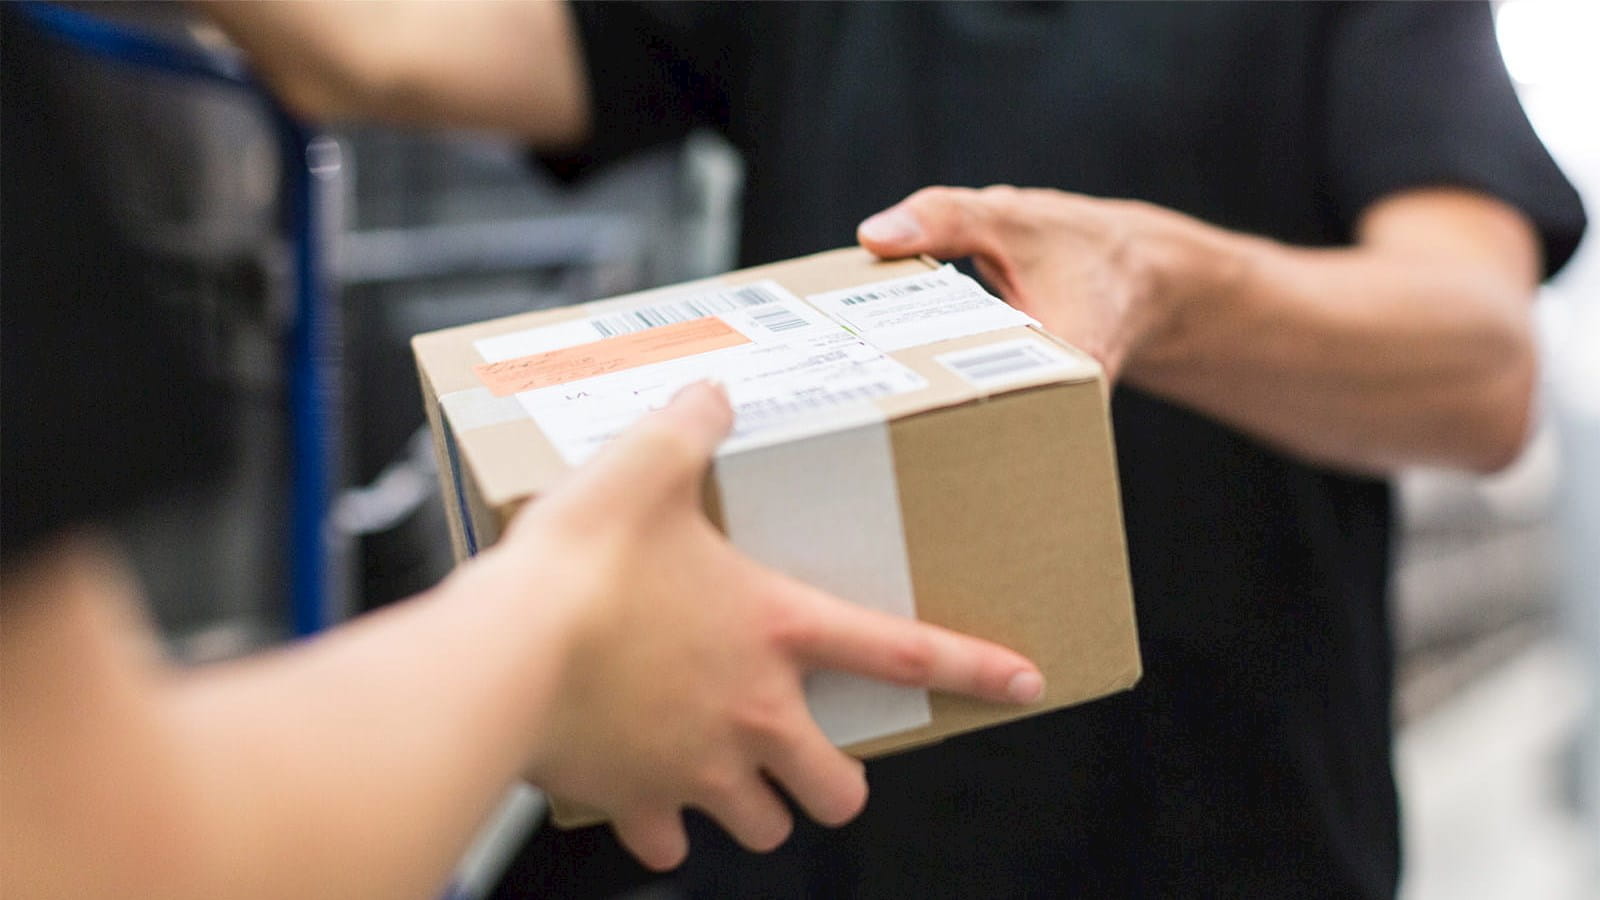 parcel box delivery passing between two people hands trade paperwork black shirts